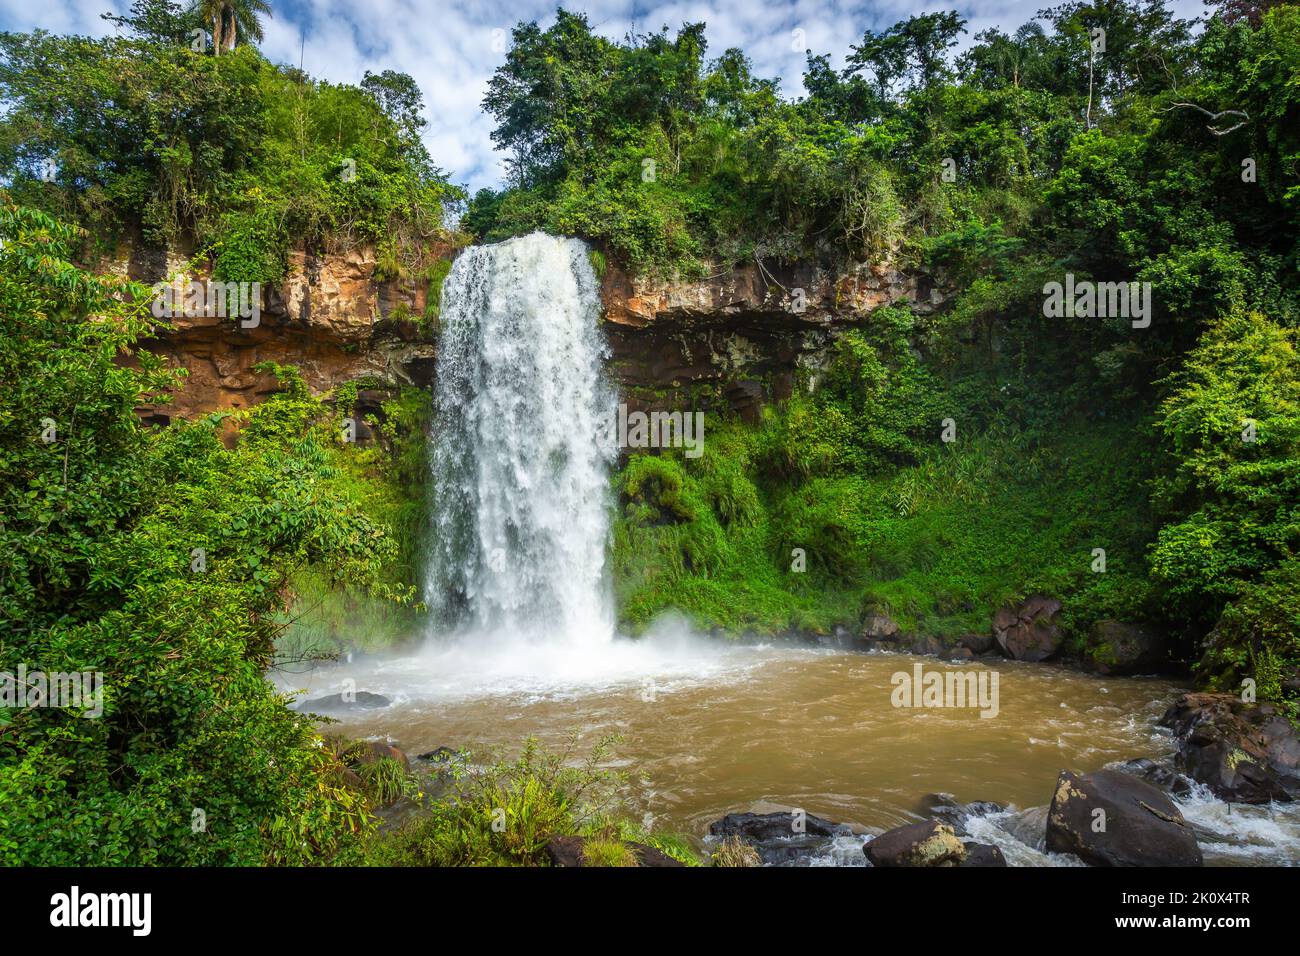 Iguazu Falls dramatic landscape, view from Argentina side, South America Stock Photo